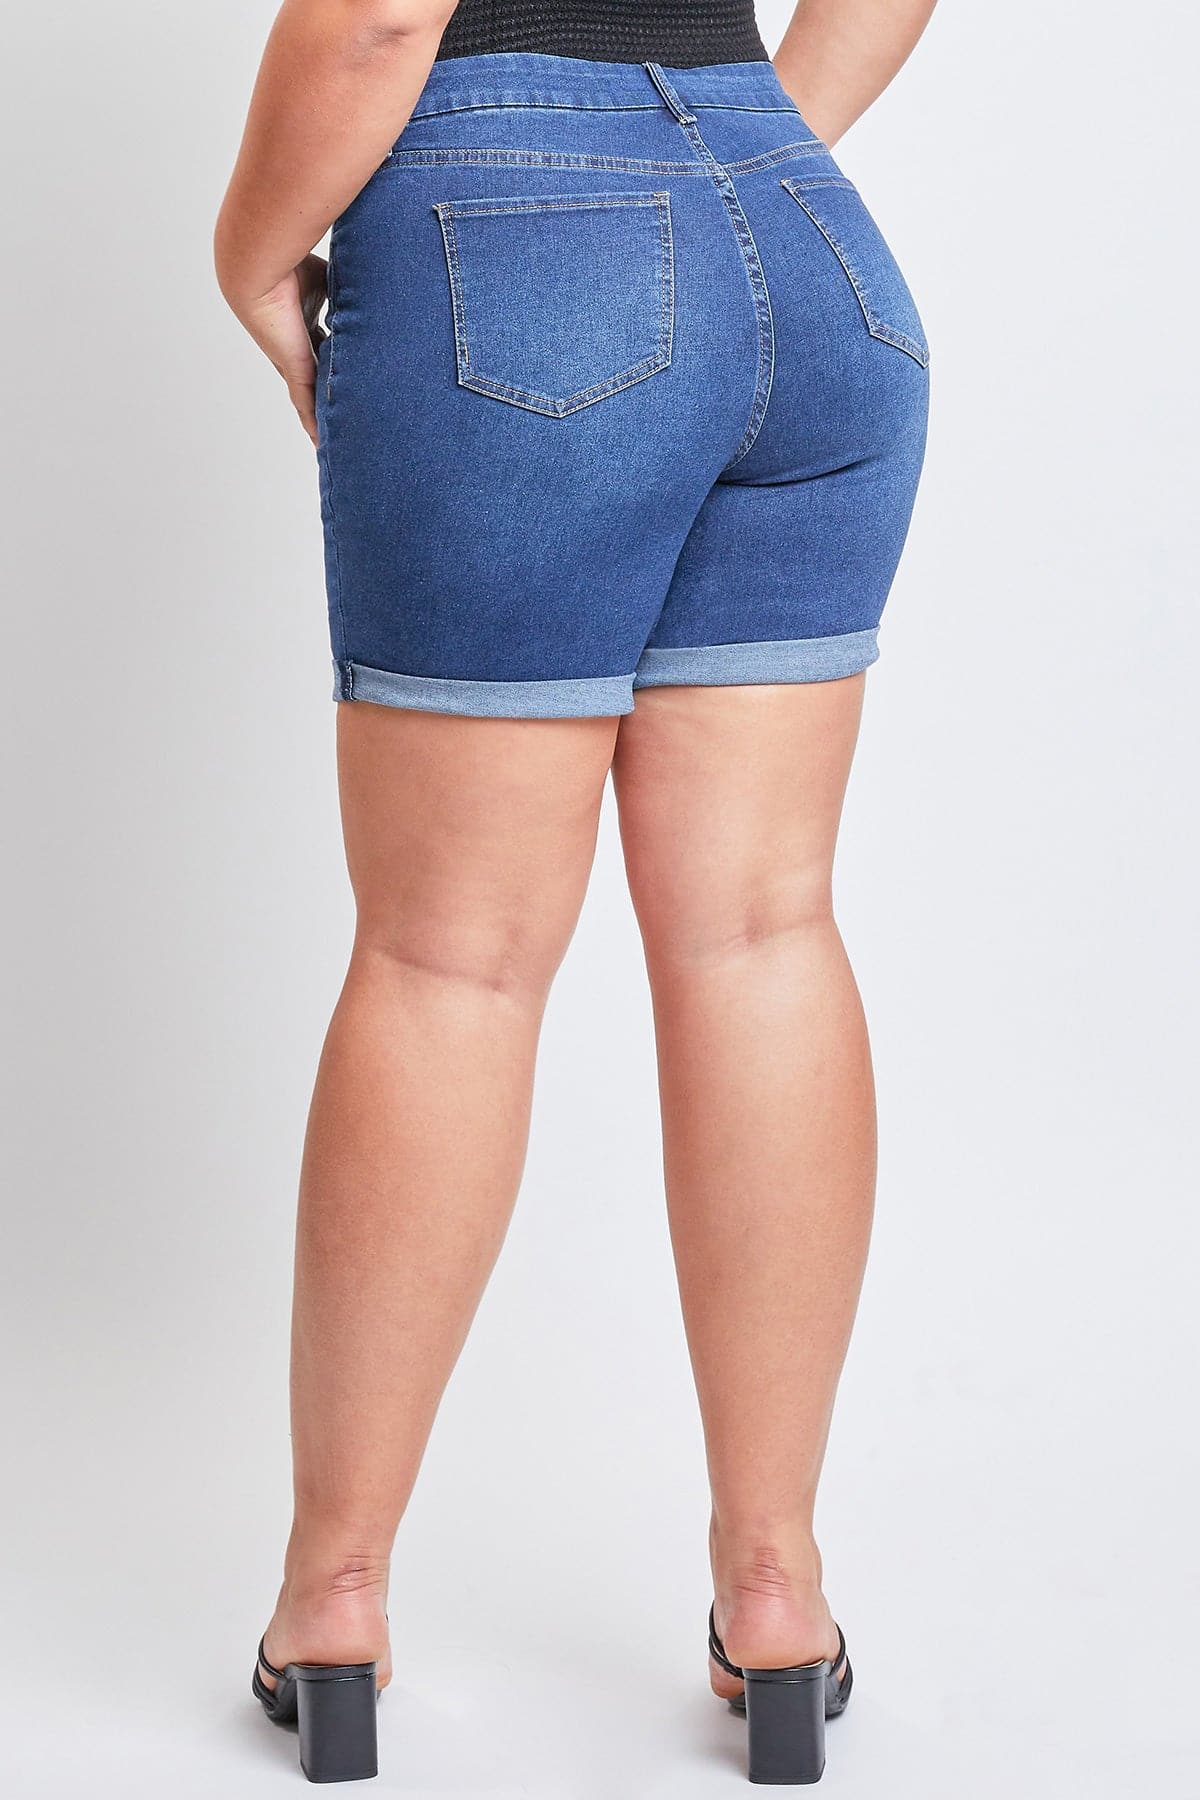 Plus Size Women's Curvy Fit Shorts With Rolled Cuffs